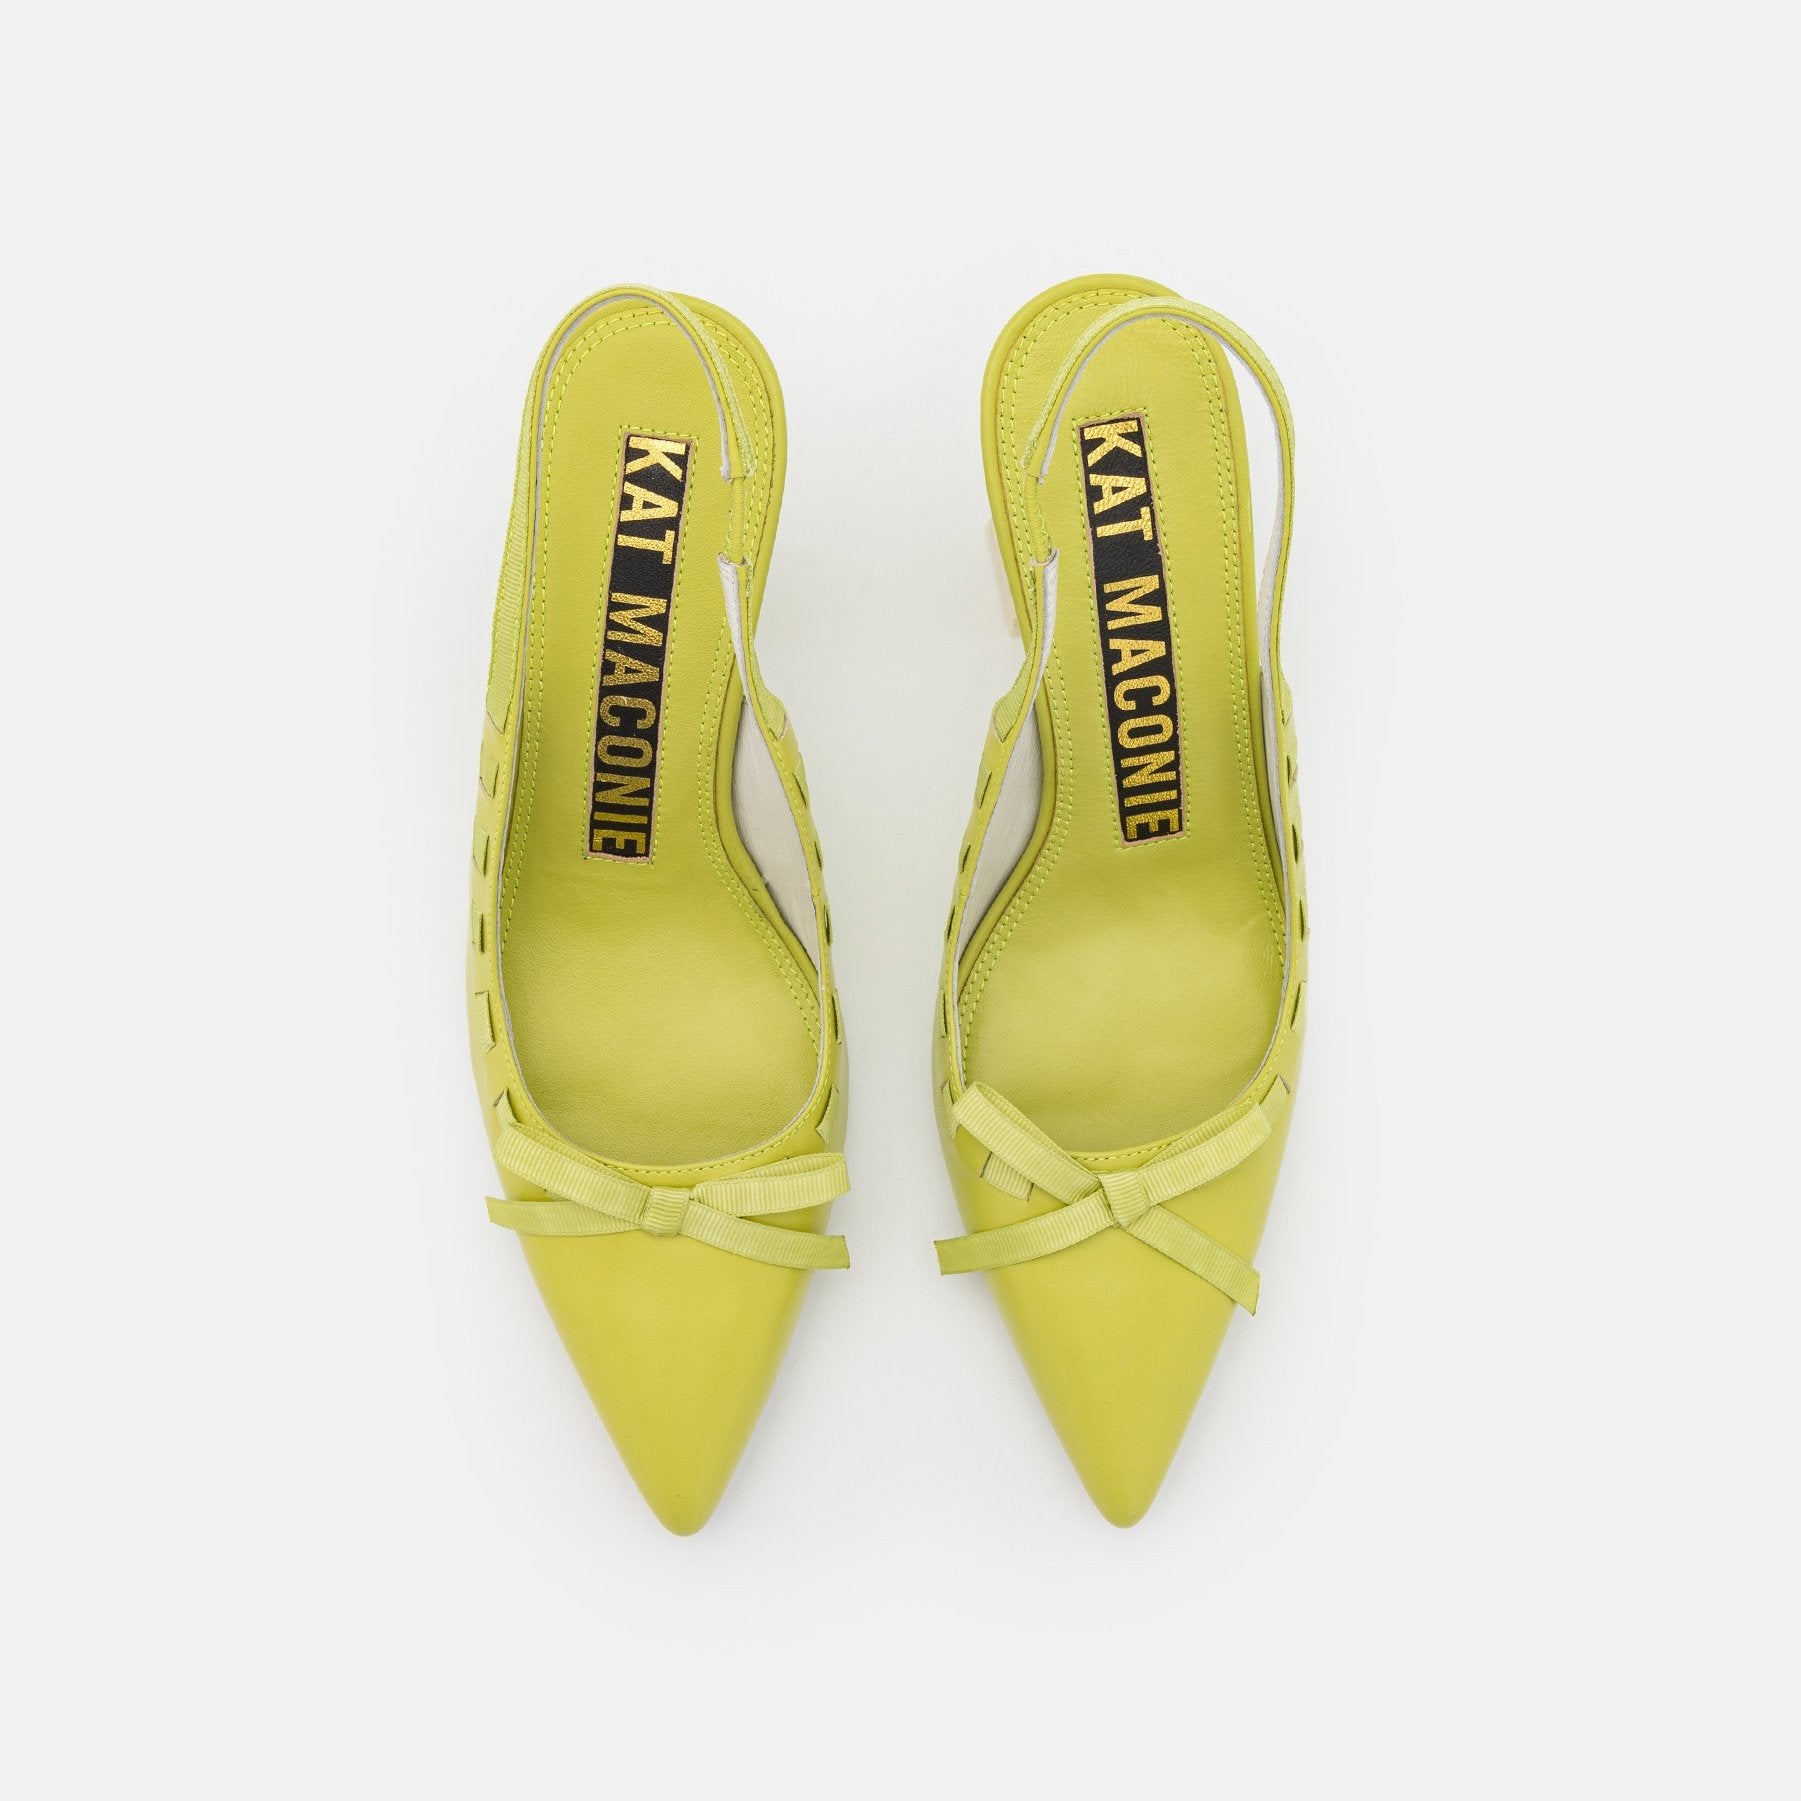 birdseye view of a pair of the kat maconie Kacy high heel in the color celery.